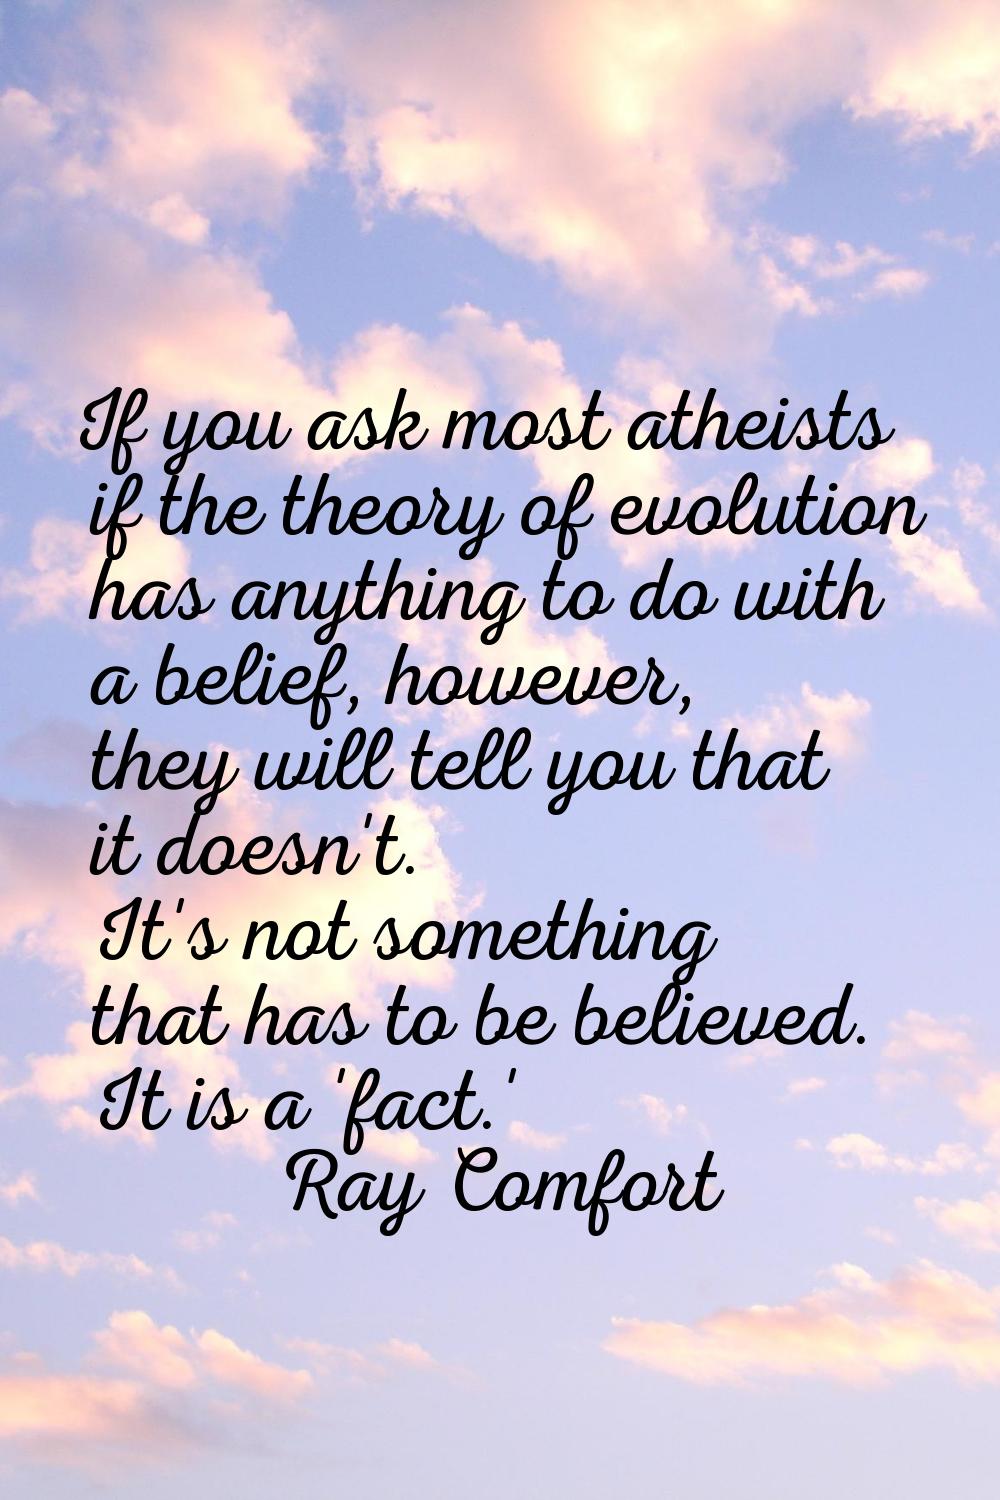 If you ask most atheists if the theory of evolution has anything to do with a belief, however, they